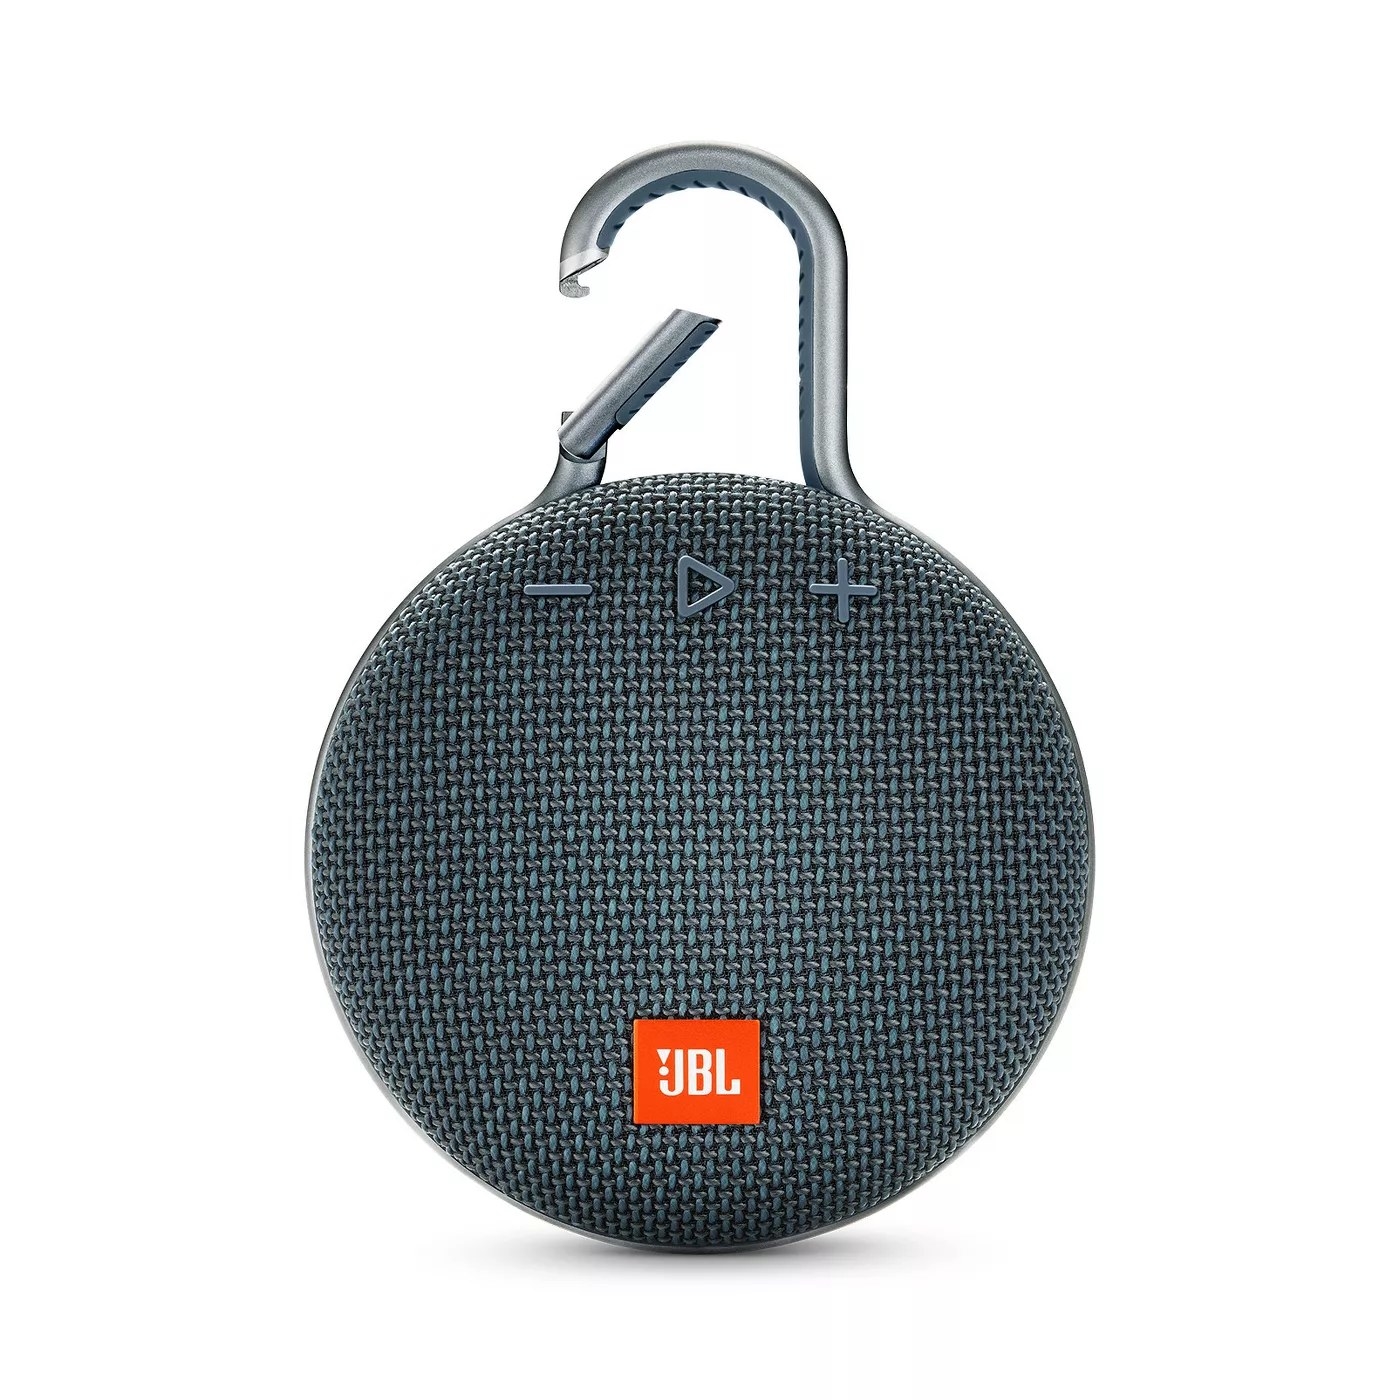 The circular portable speaker with a hook to attach to clothes or a backpack